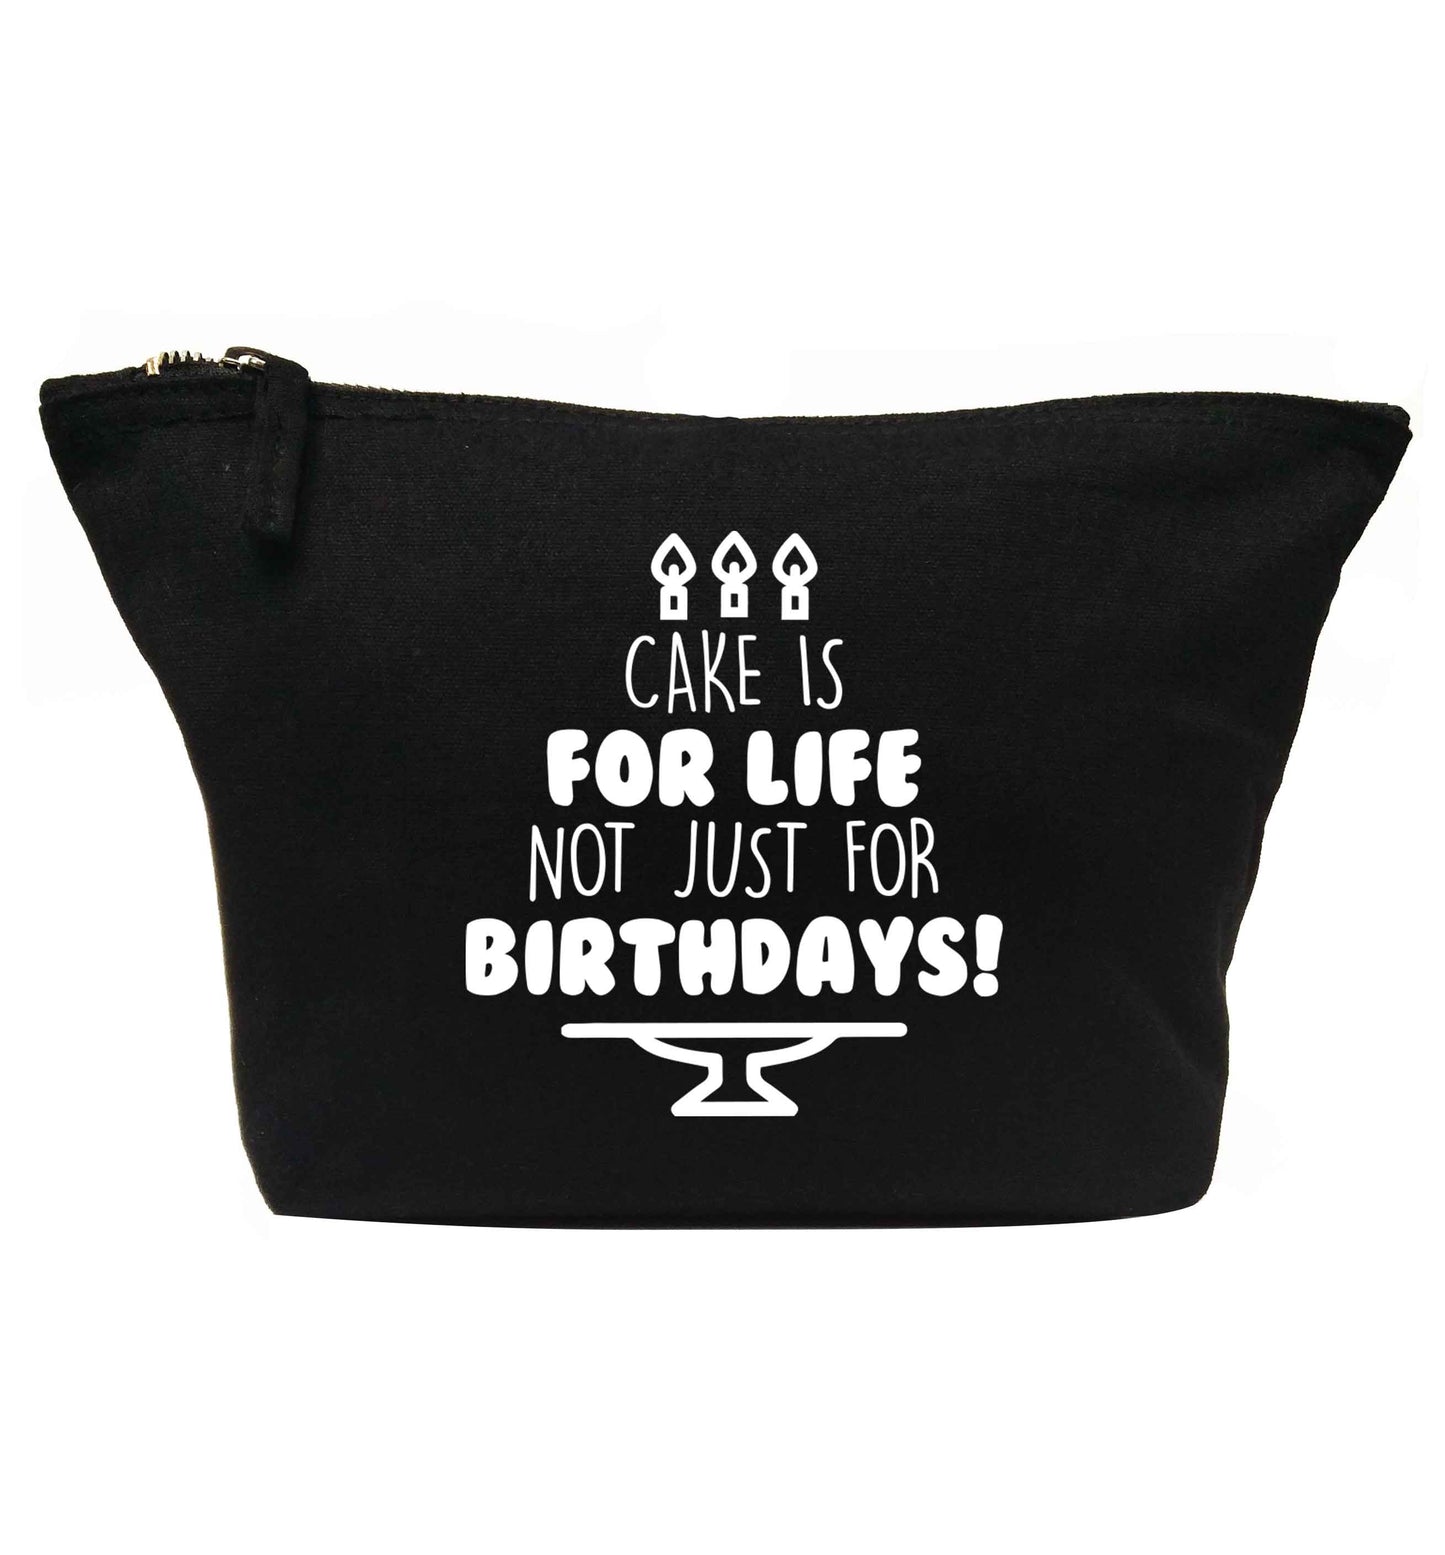 Cake is for life not just for birthdays | makeup / wash bag